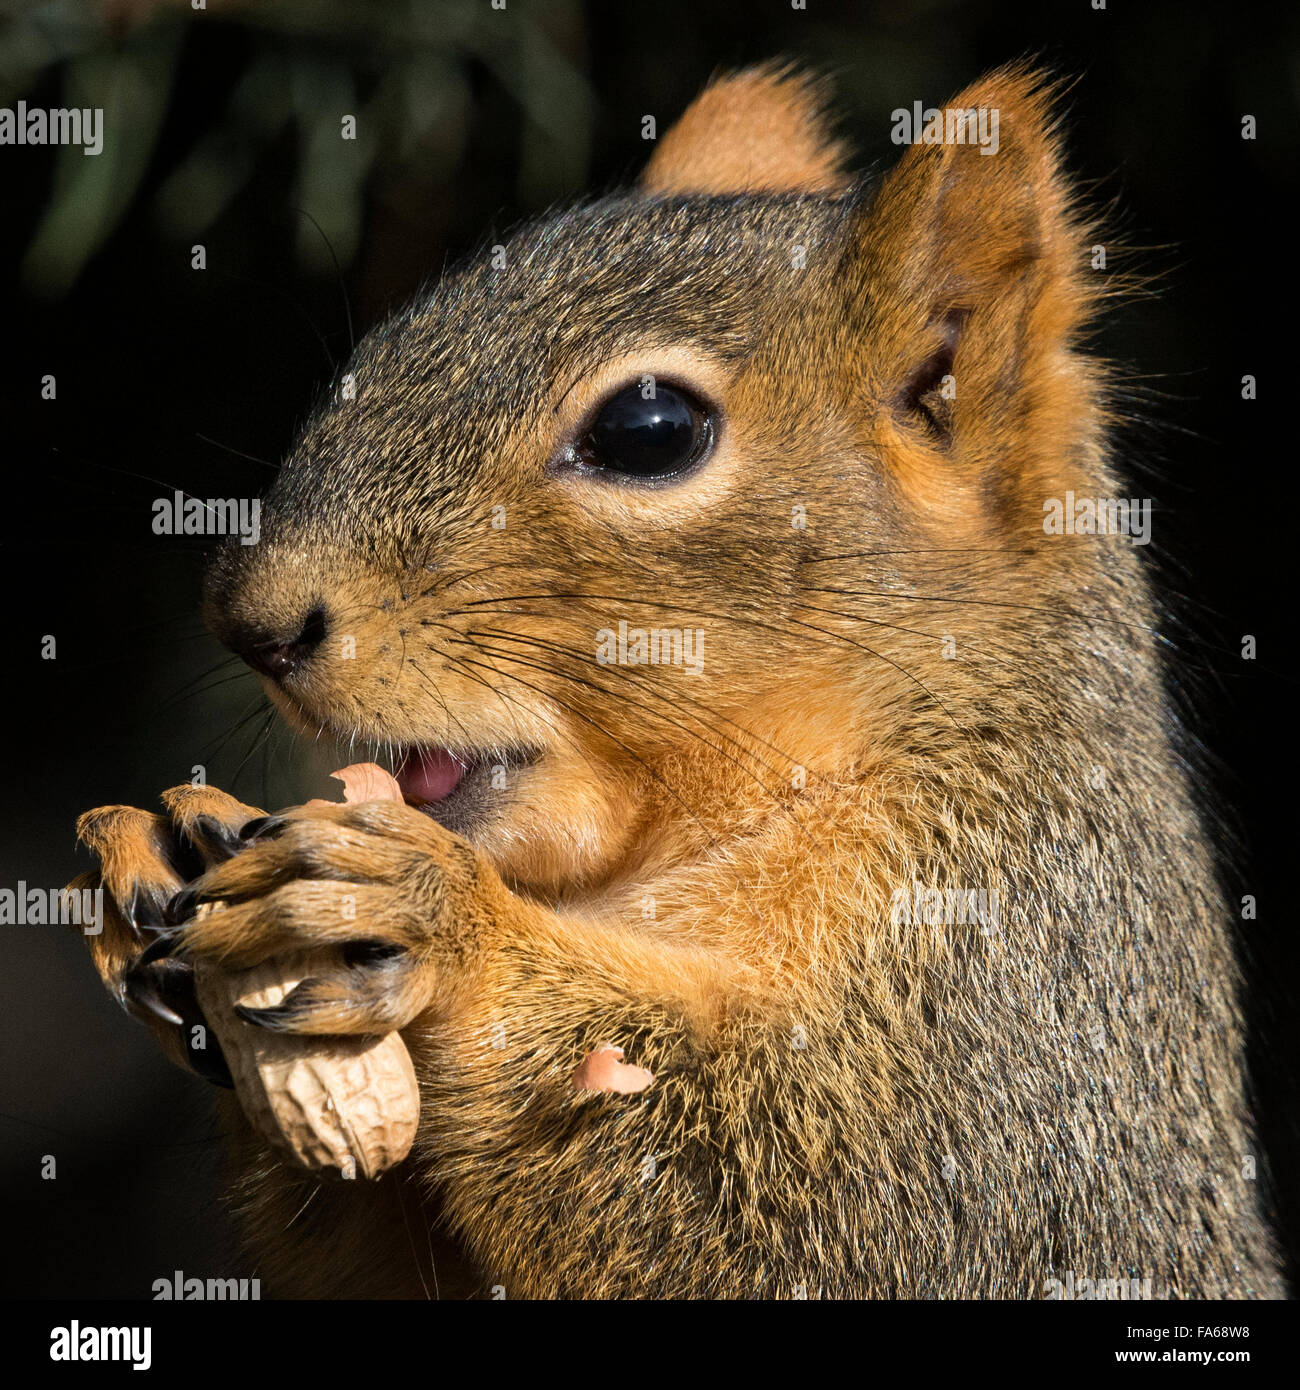 Close-up of a squirrel eating a peanut, Colorado, United States Stock Photo